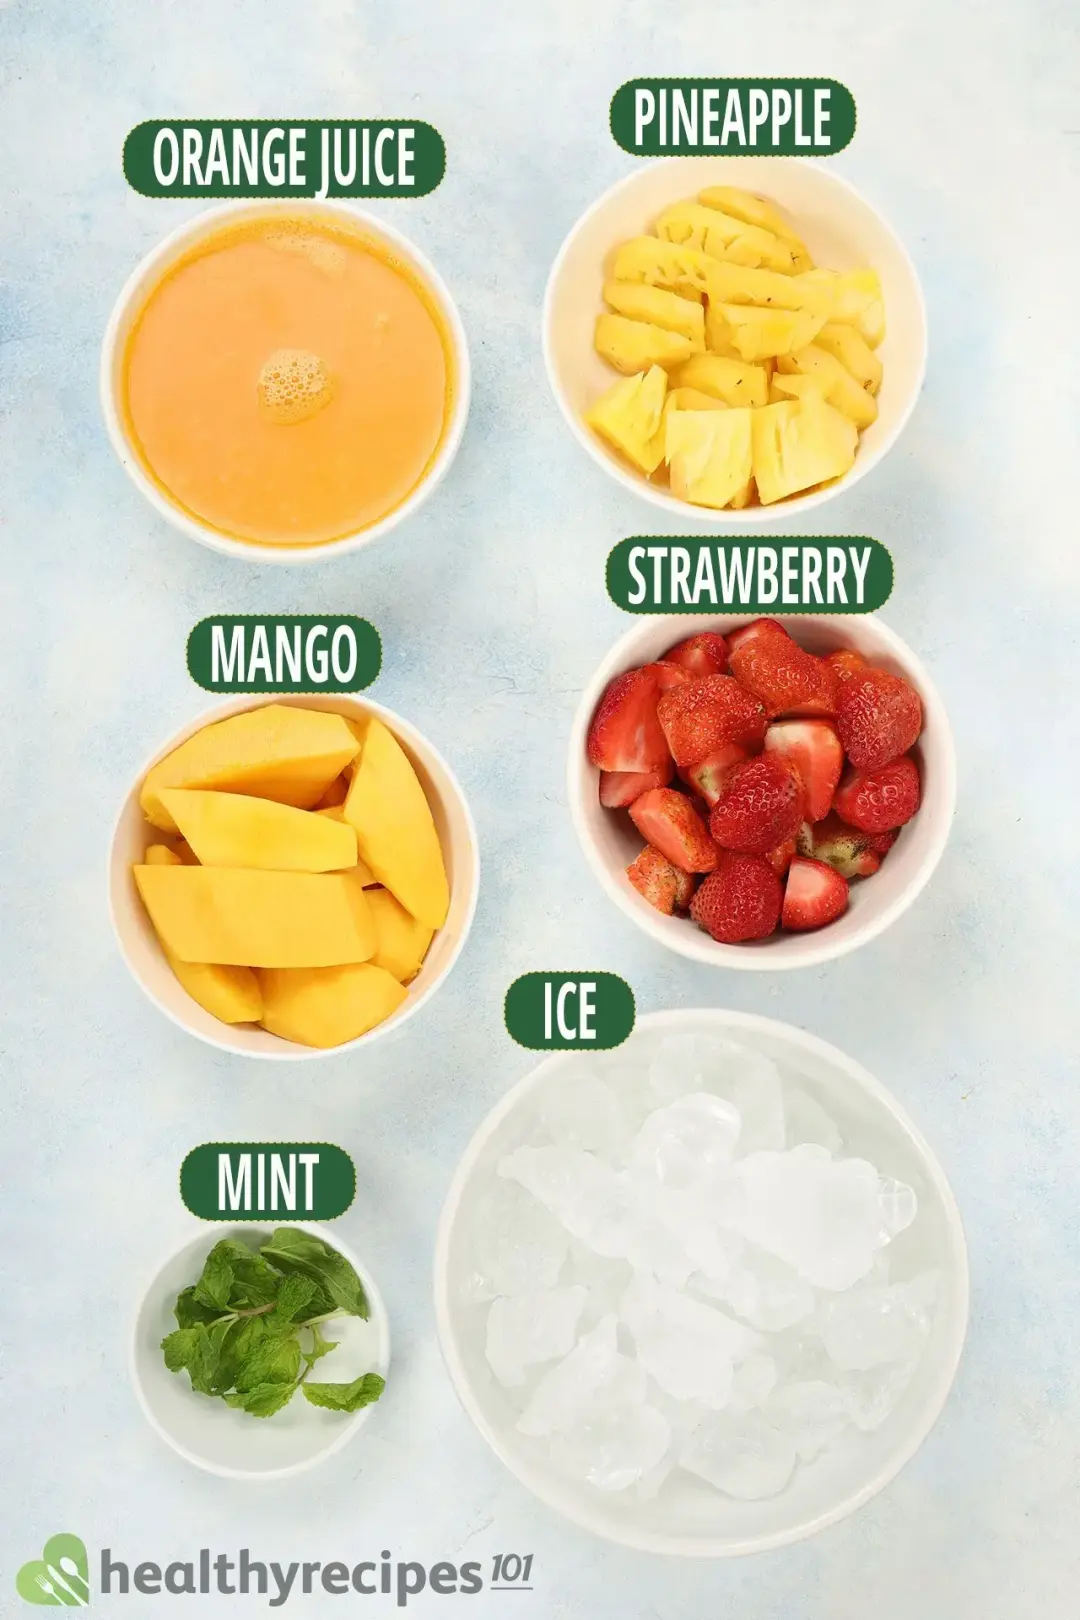 Main Ingredients for Pineapple Mango Strawberry Smoothie